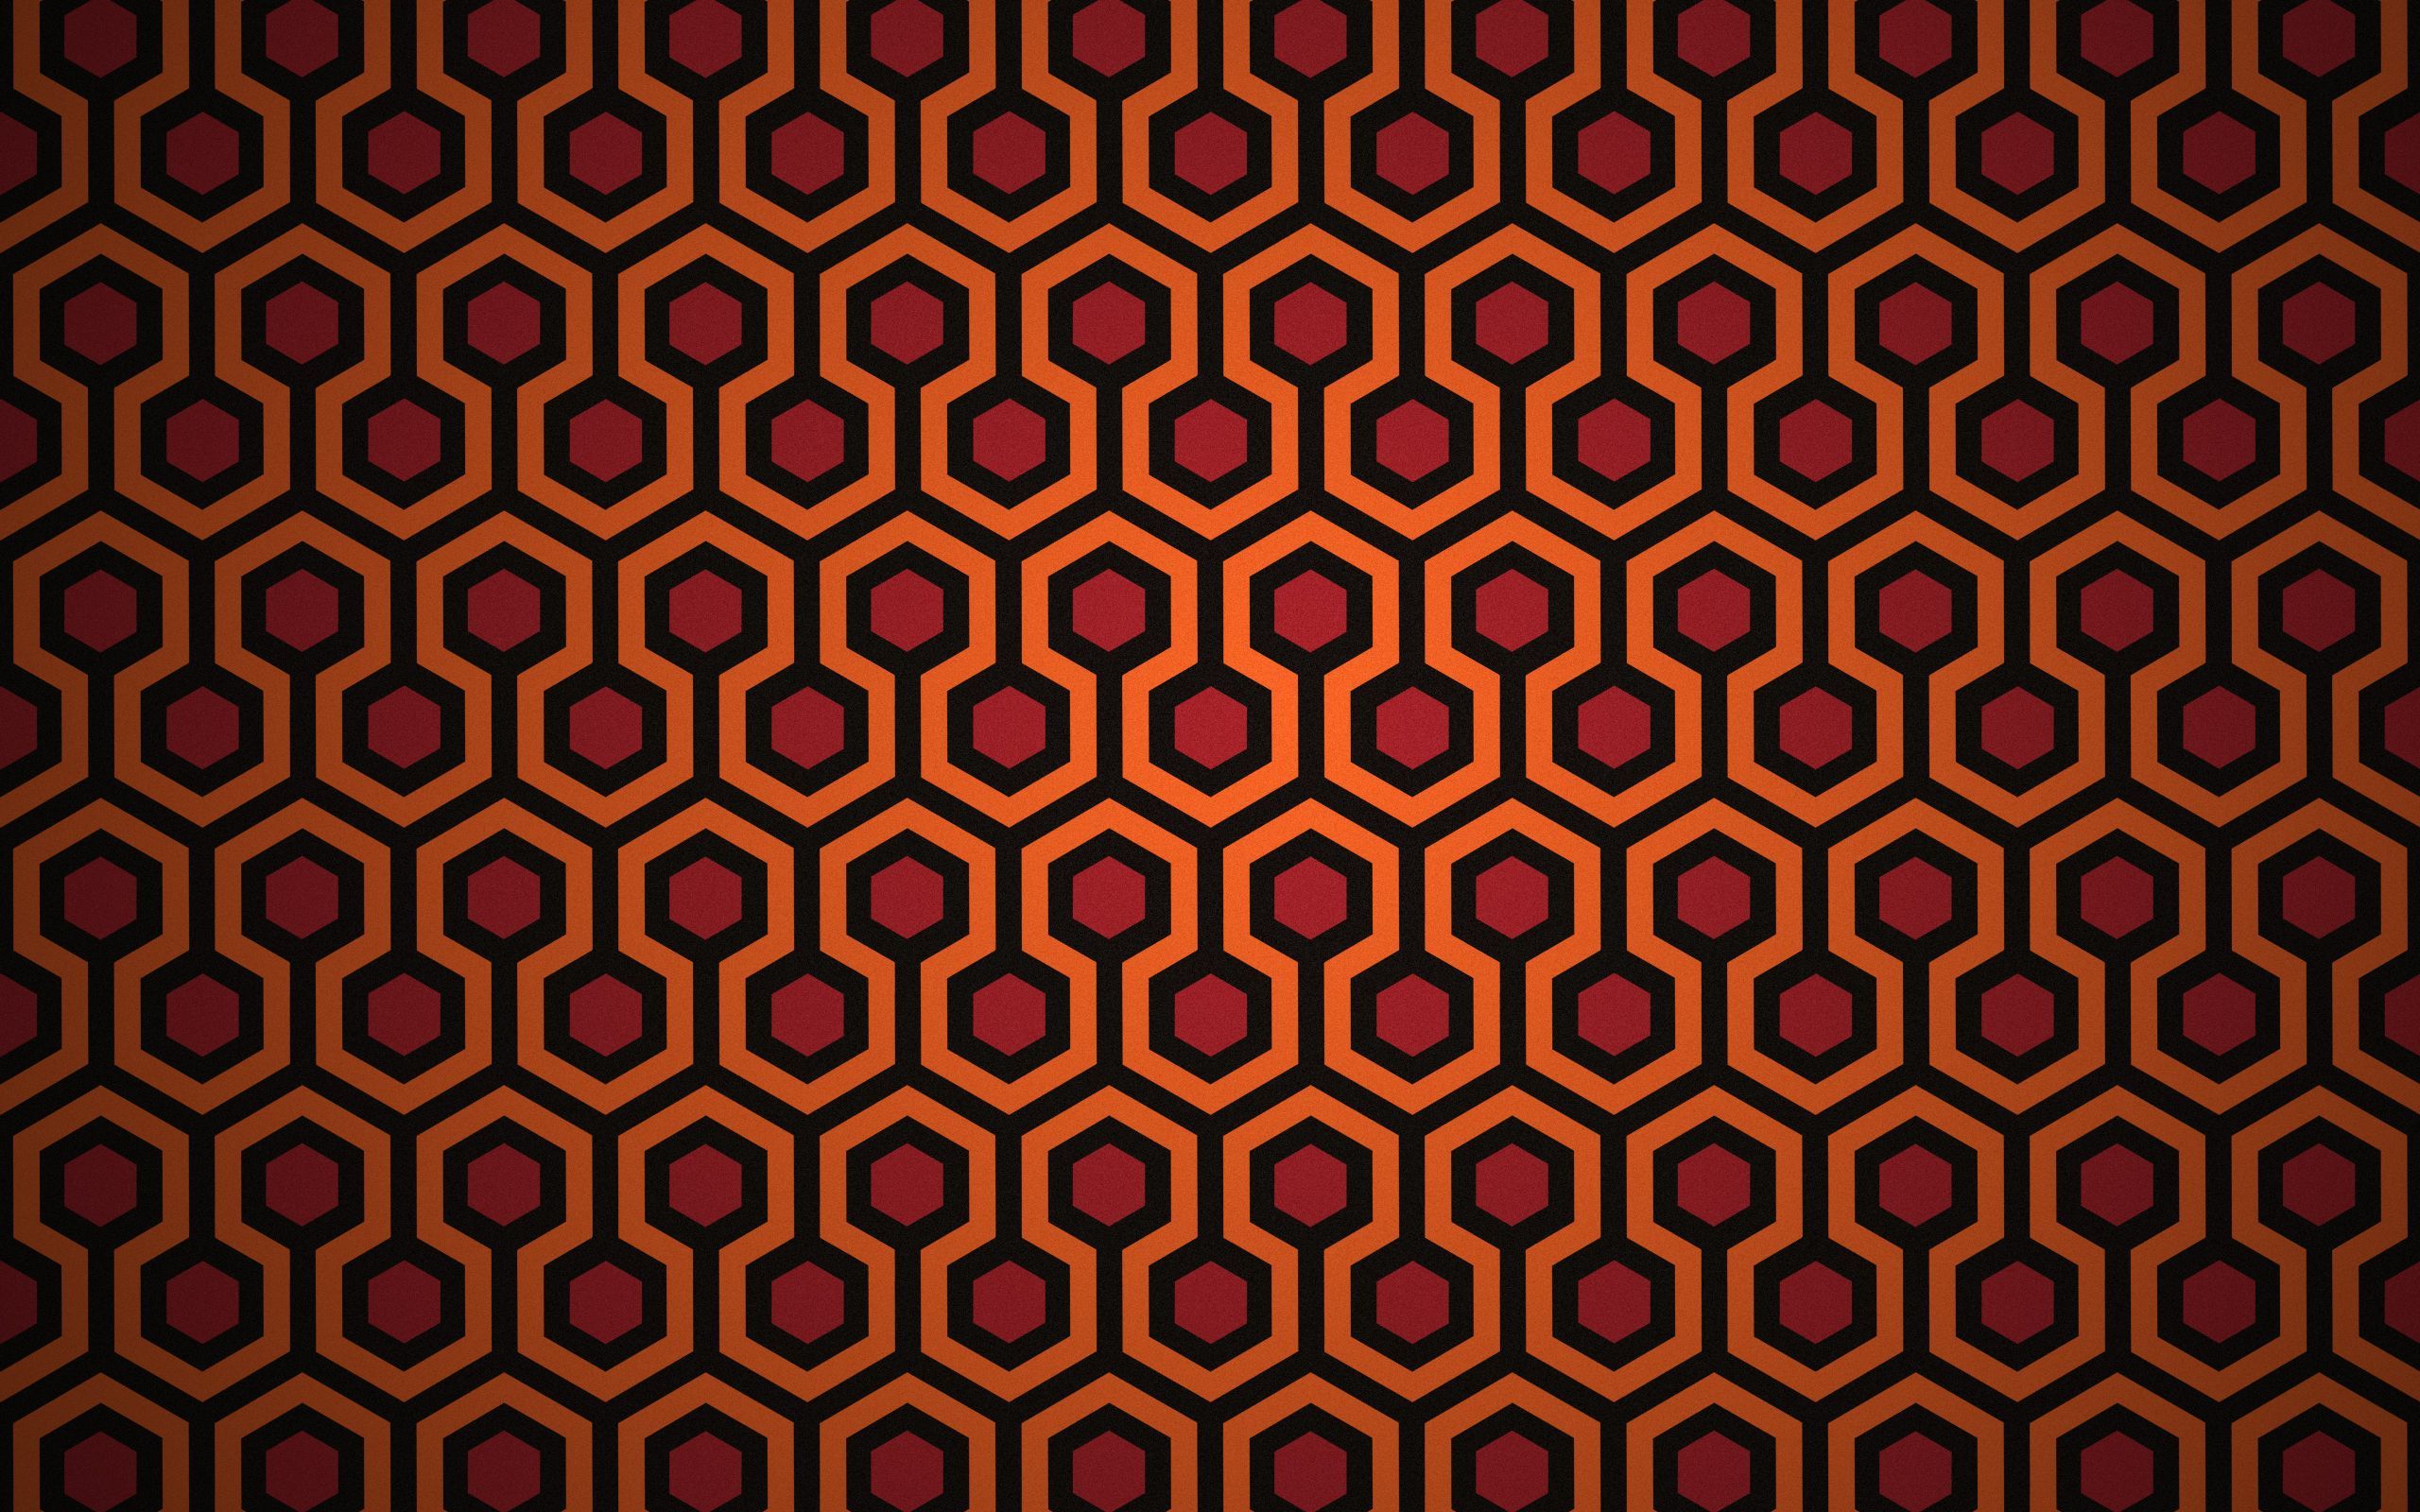 Wallpaper based on the carpet from the Shining (not created by me ...